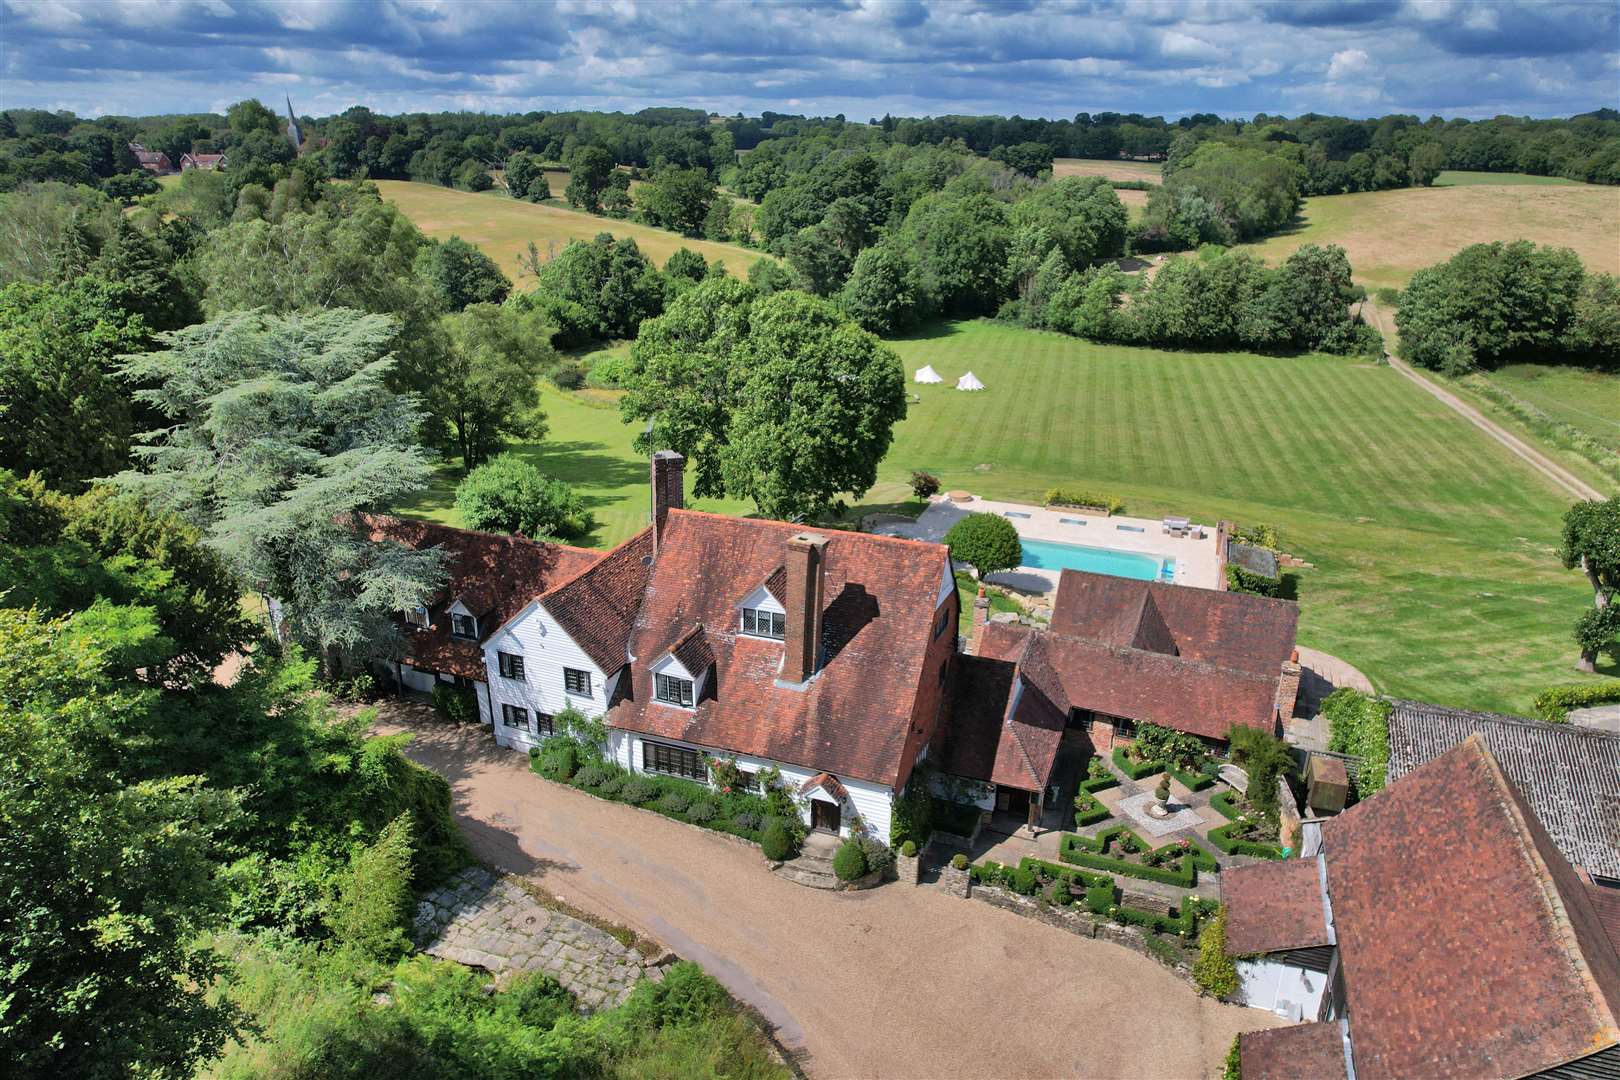 This sprawling Tudor property covers almost 230 acres on the Kent, Sussex and Surrey borders. Picture: Savills